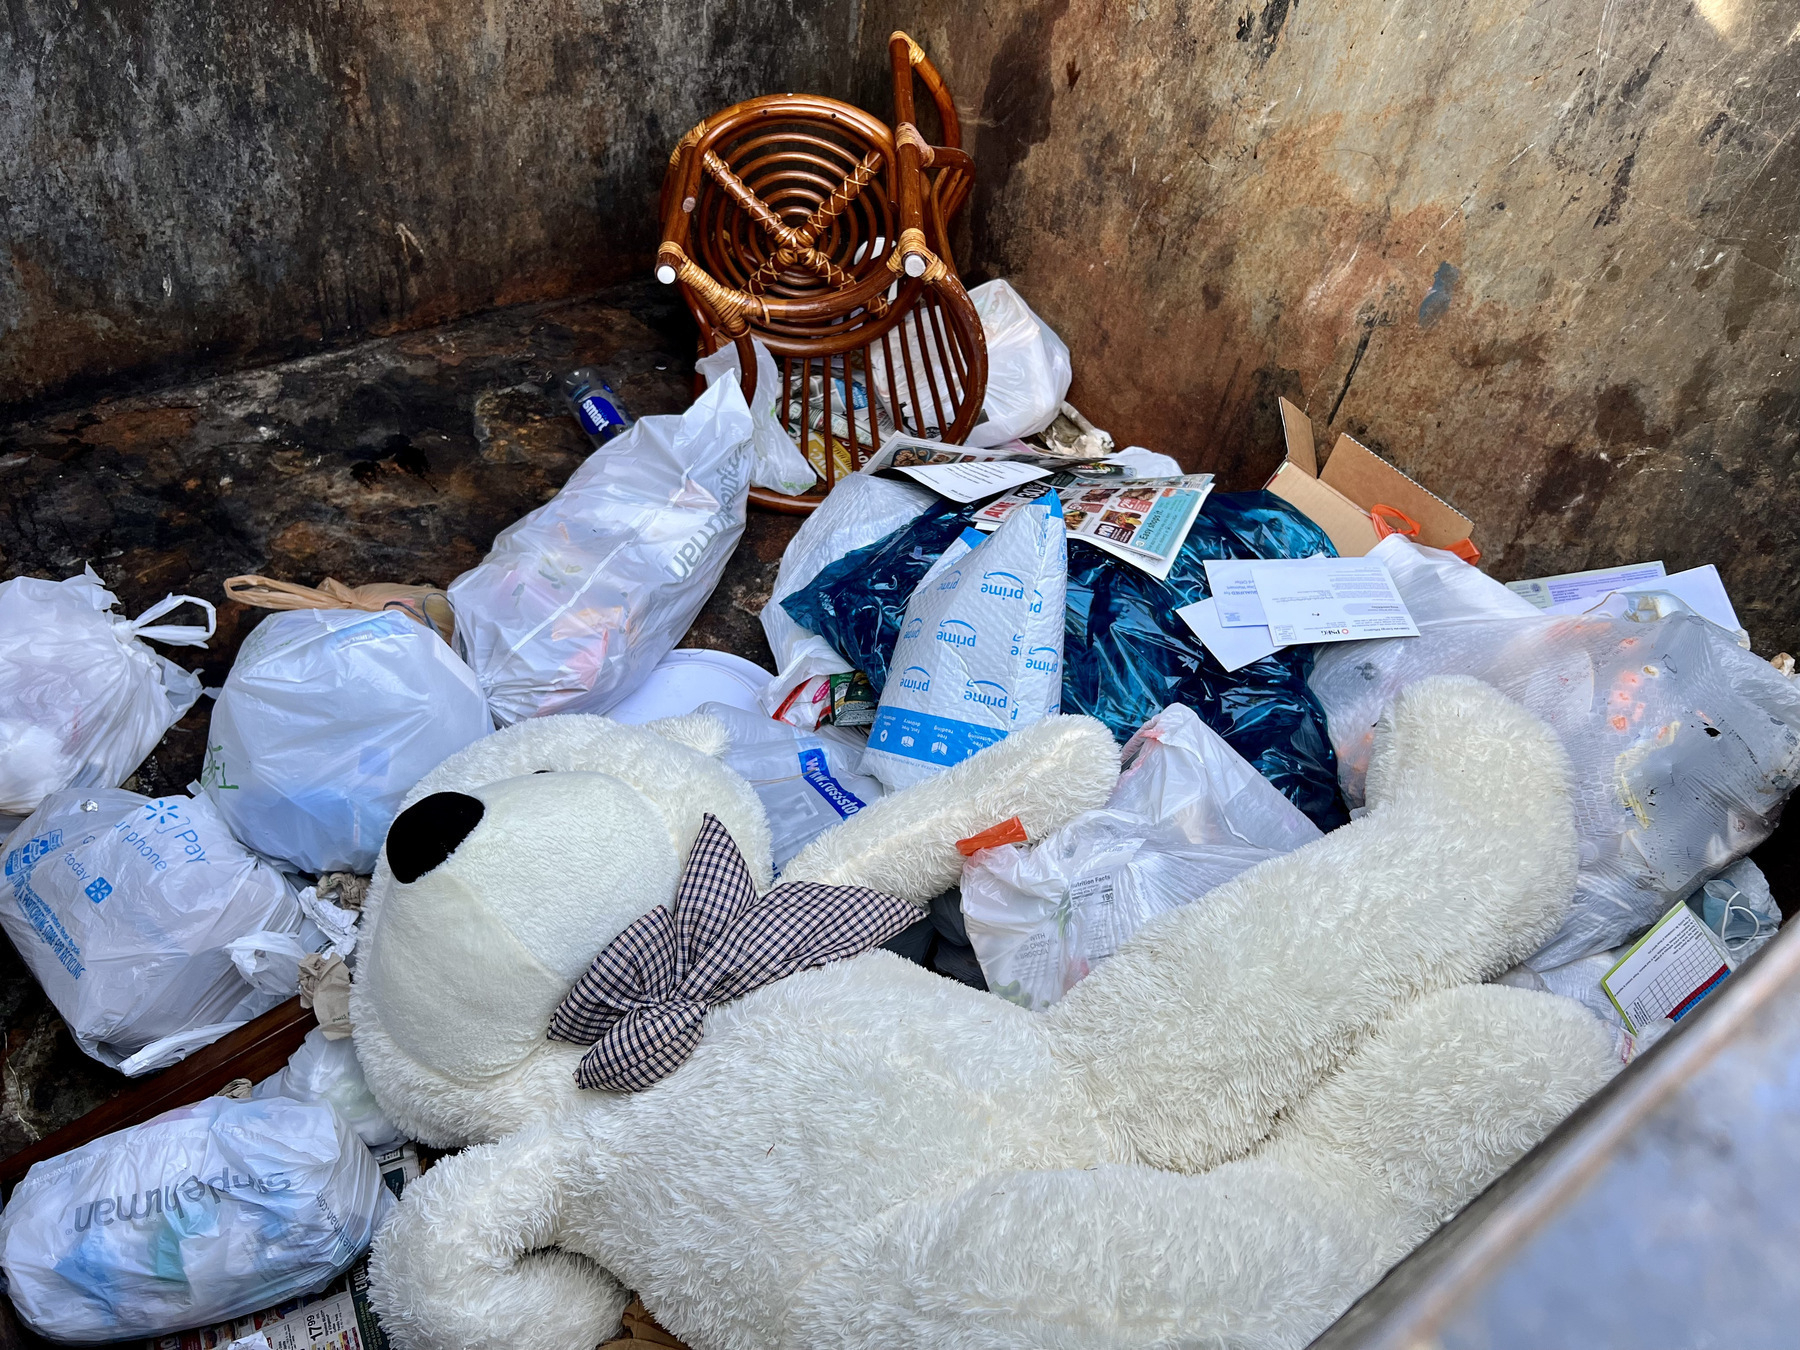 Large teddy bear and chair in dumpster among other trash